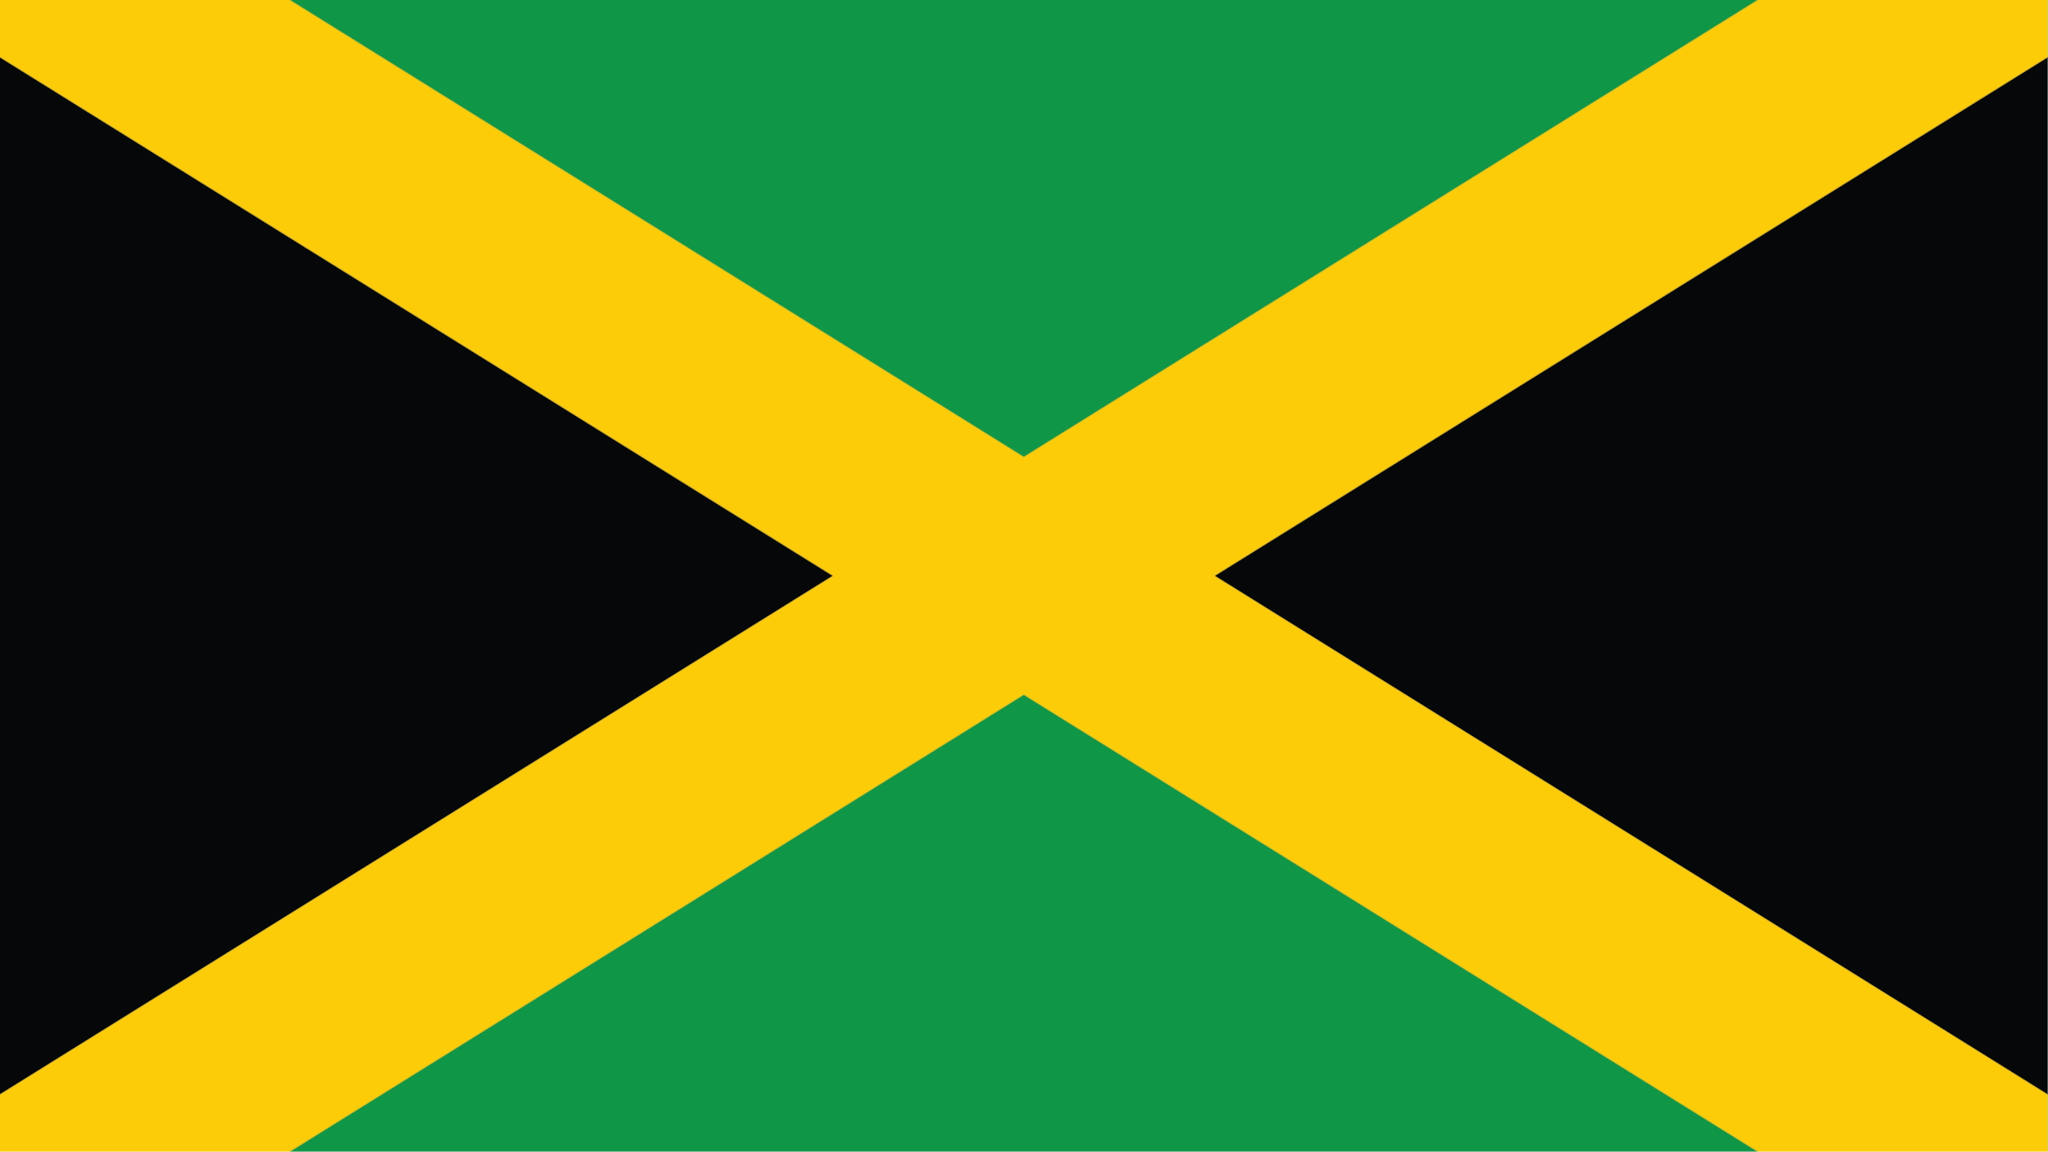 The Jamaican flag showing a yellow X that expands to each of the corners of the flag. There is solid green filling in the area above and below the X. Solid black is filled in the space on the left and right of the X.